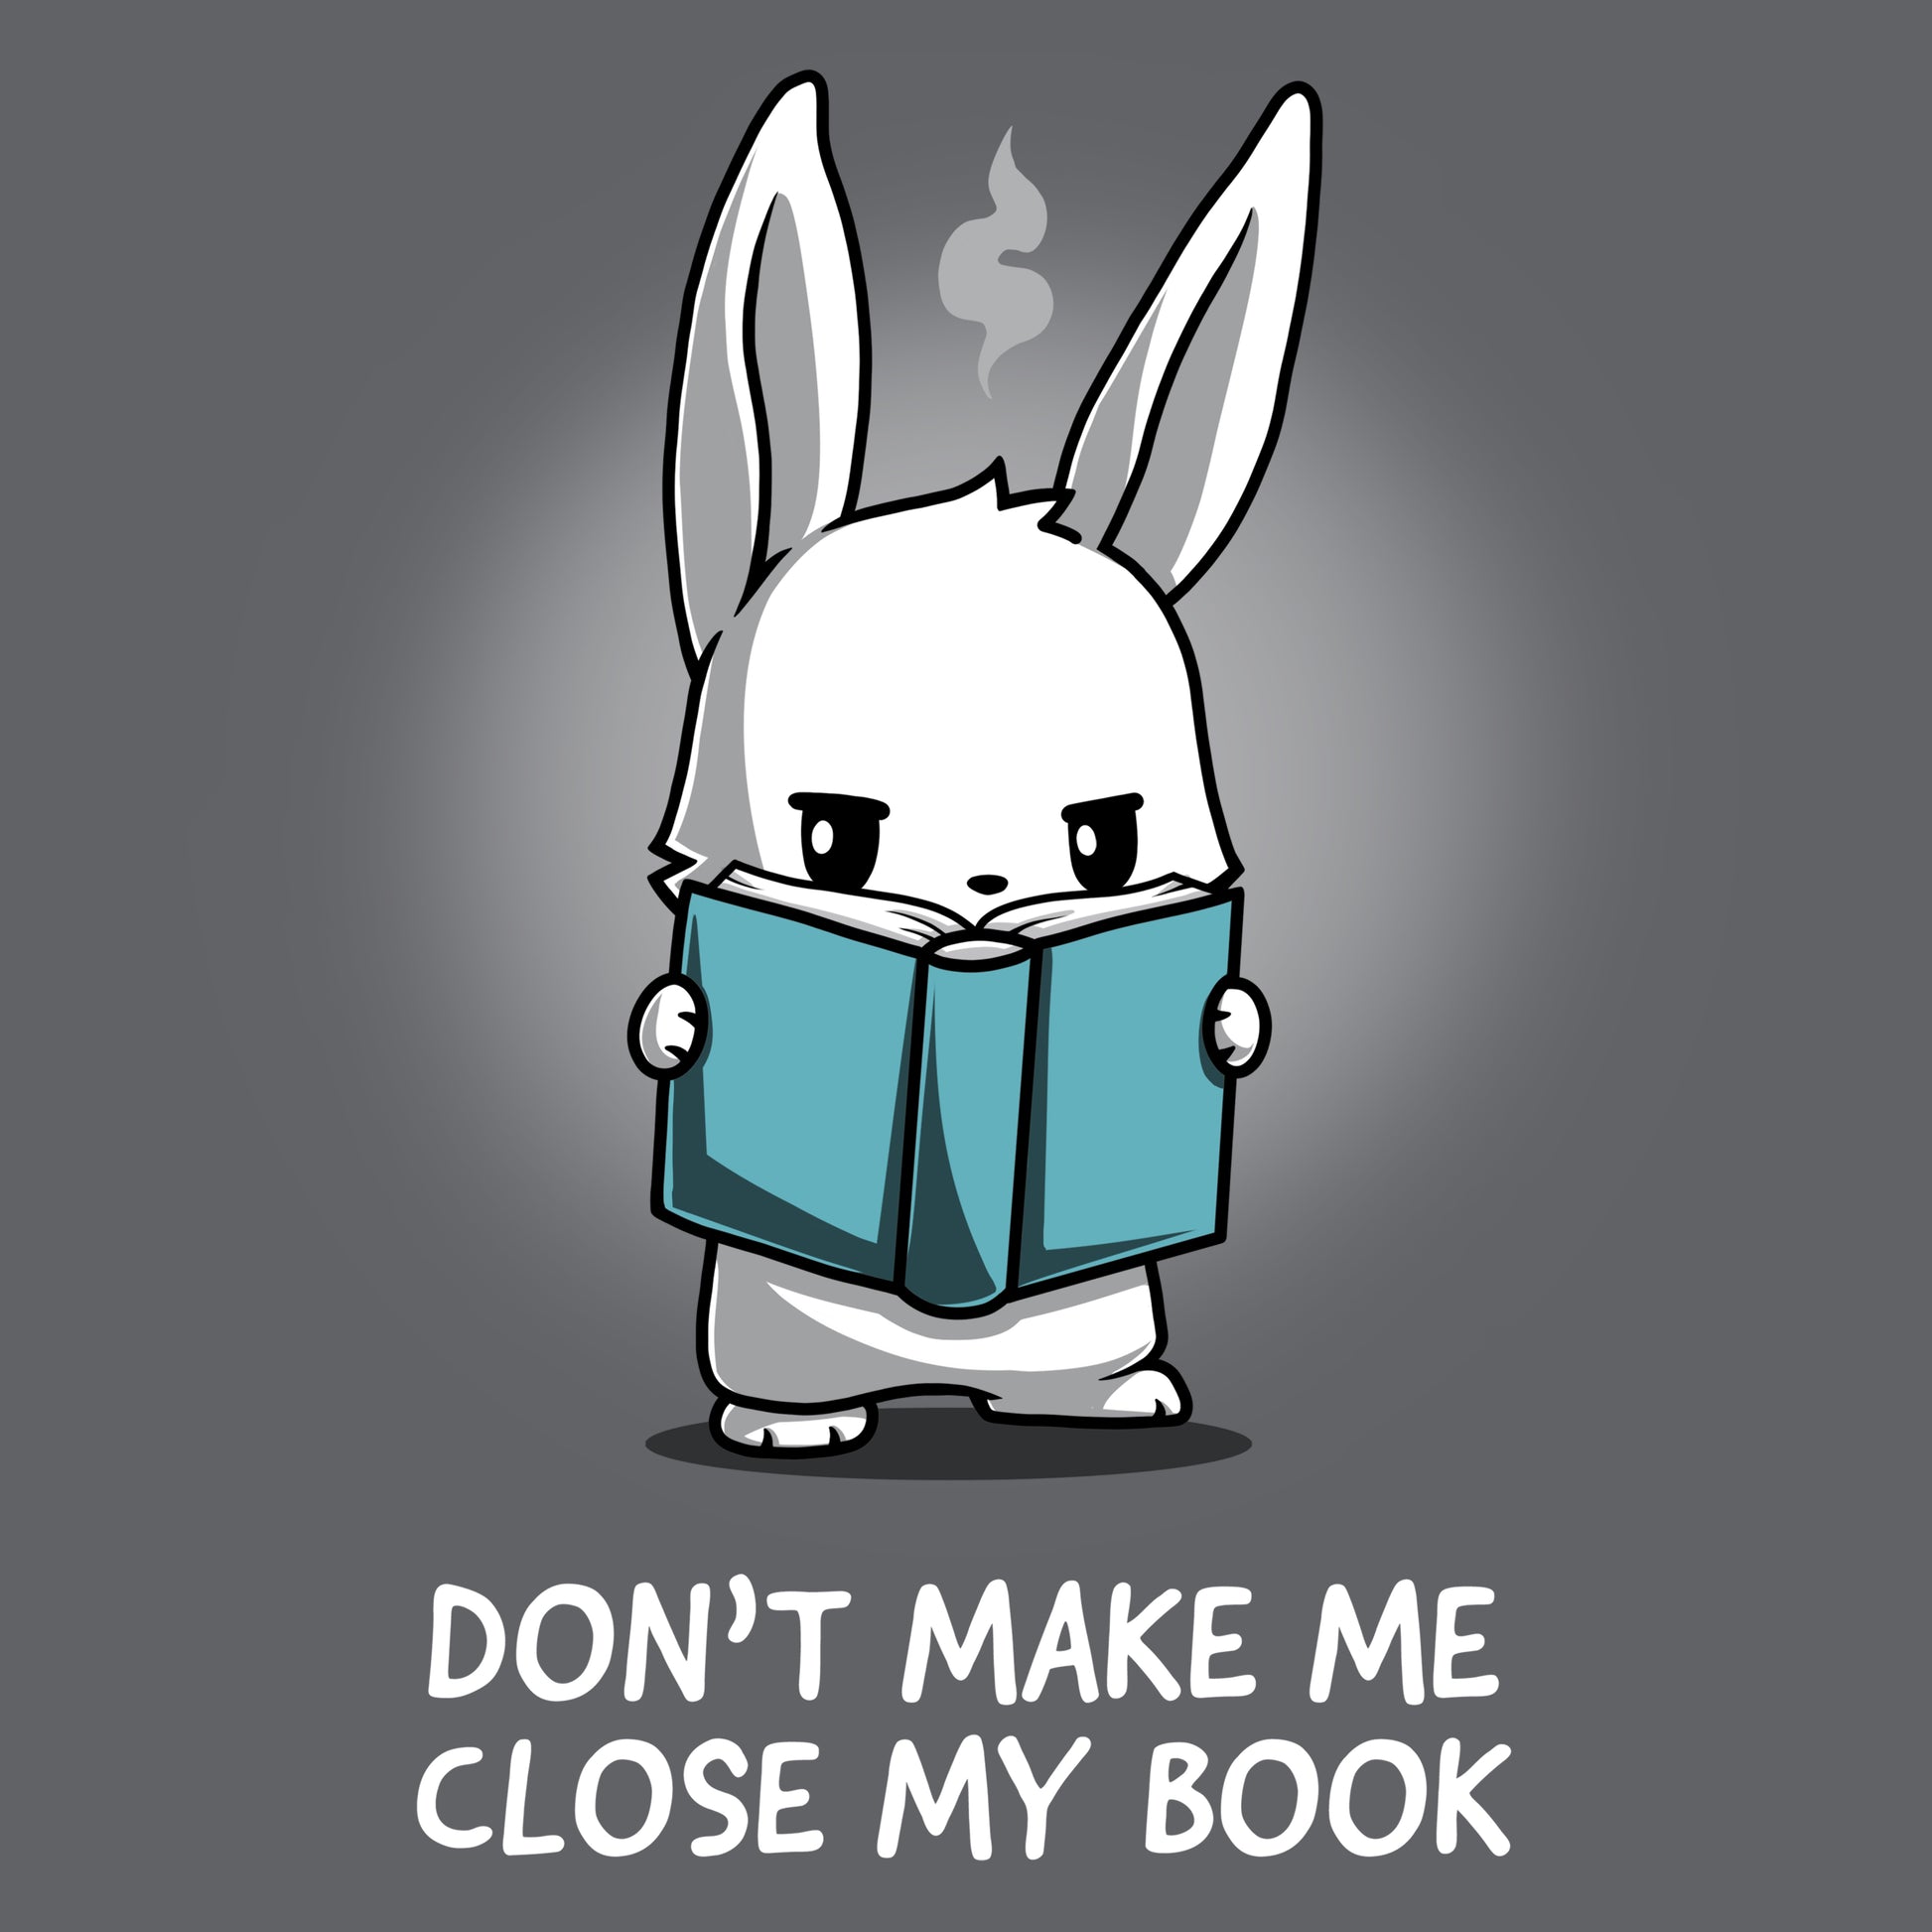 Don't make me close my TeeTurtle book while wearing a charcoal gray TeeTurtle shirt.